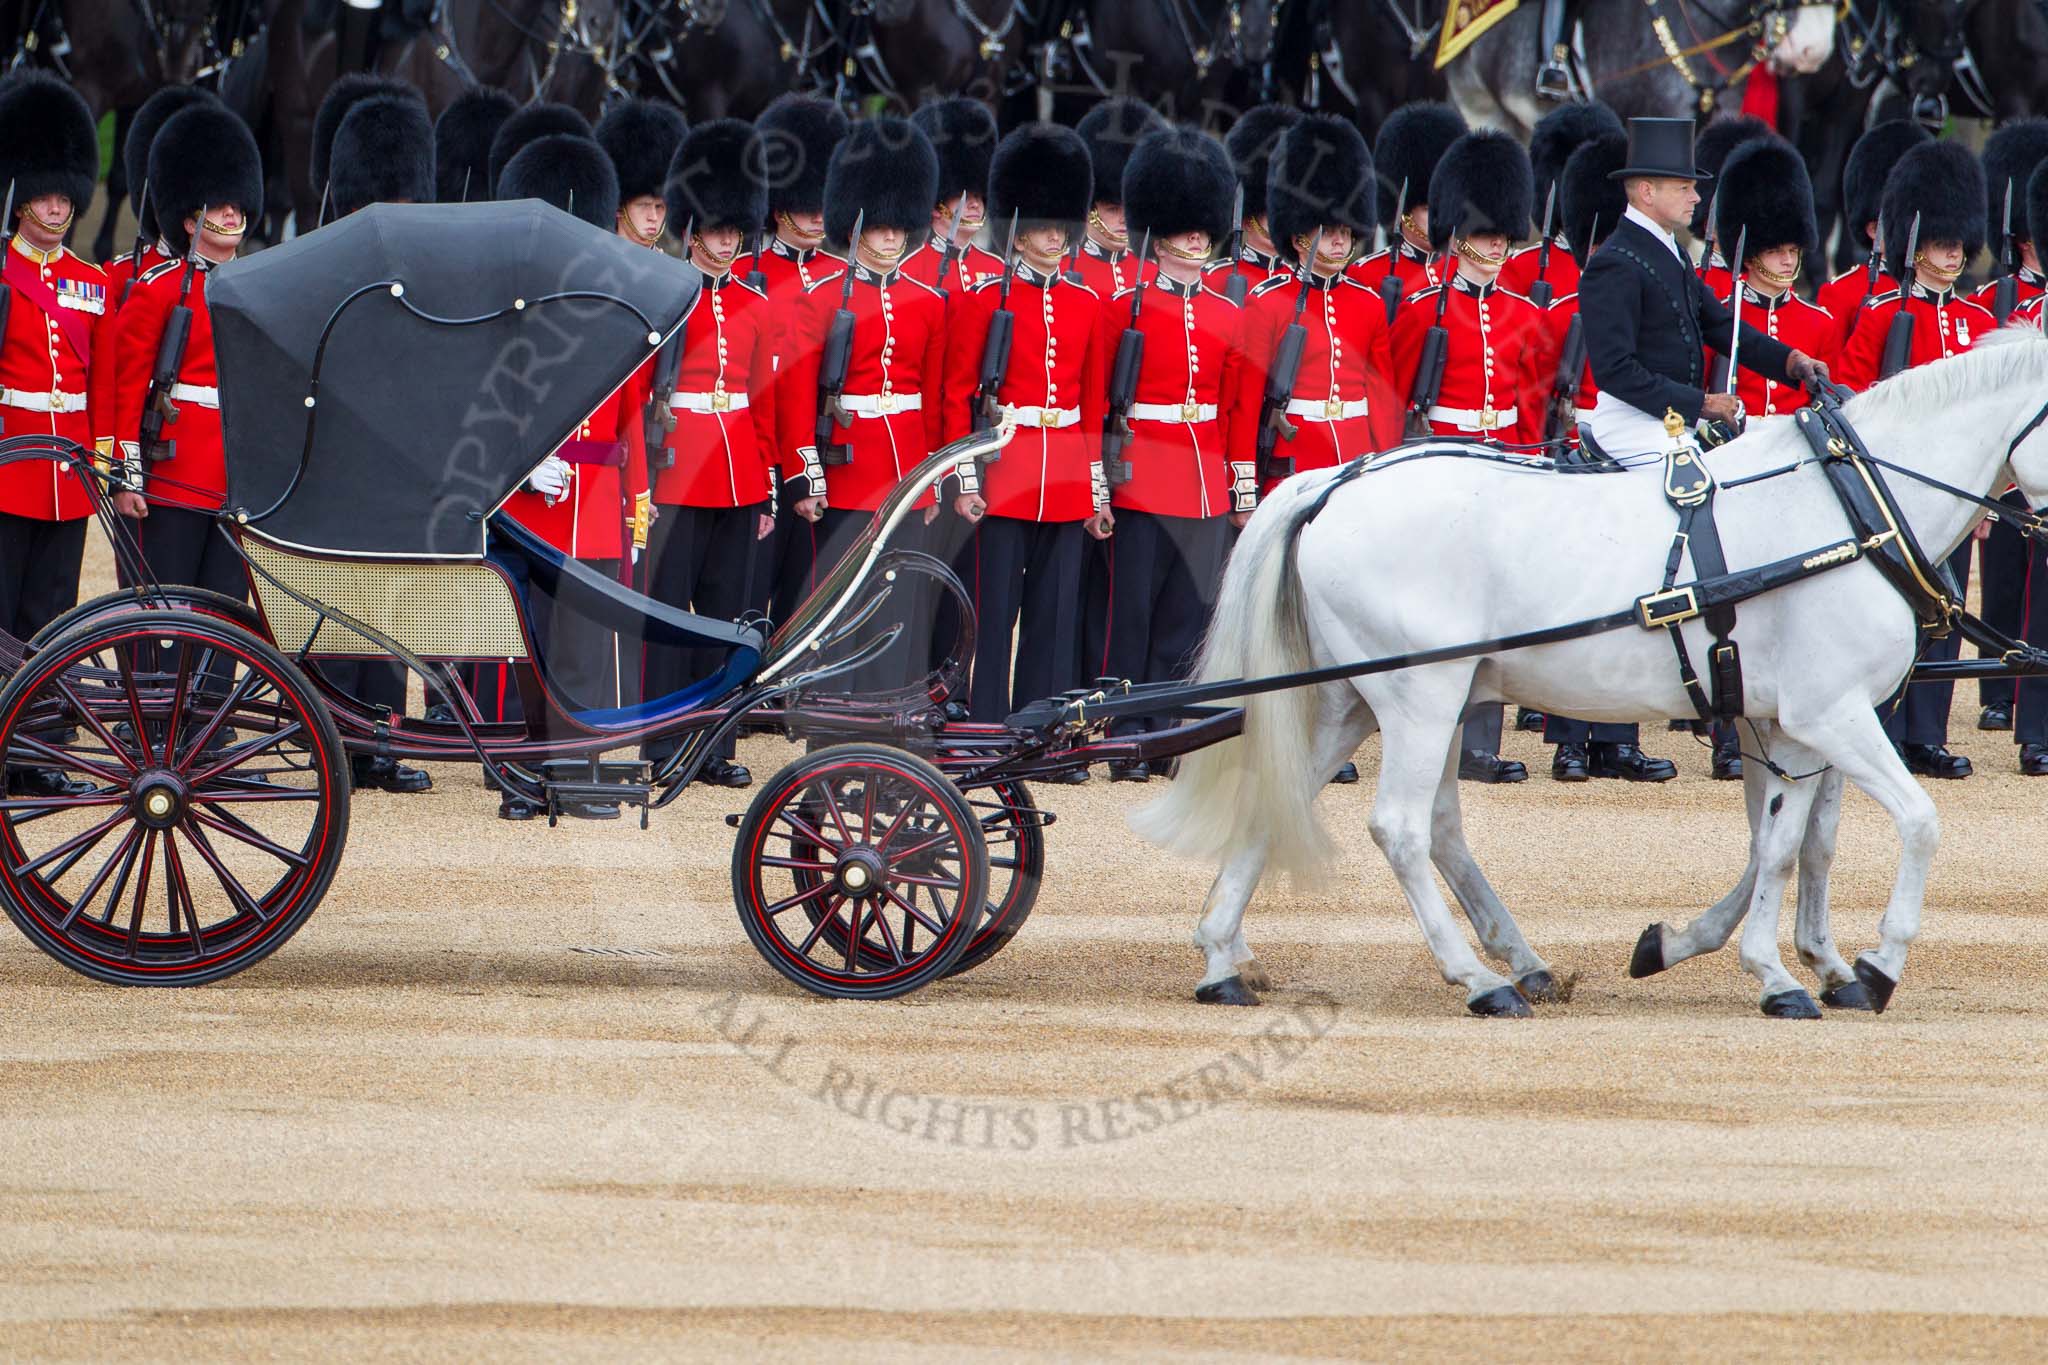 Major General's Review 2013: The Queen's Head Coachman, Mark Hargreaves, during the Inspection of the Line..
Horse Guards Parade, Westminster,
London SW1,

United Kingdom,
on 01 June 2013 at 11:03, image #289